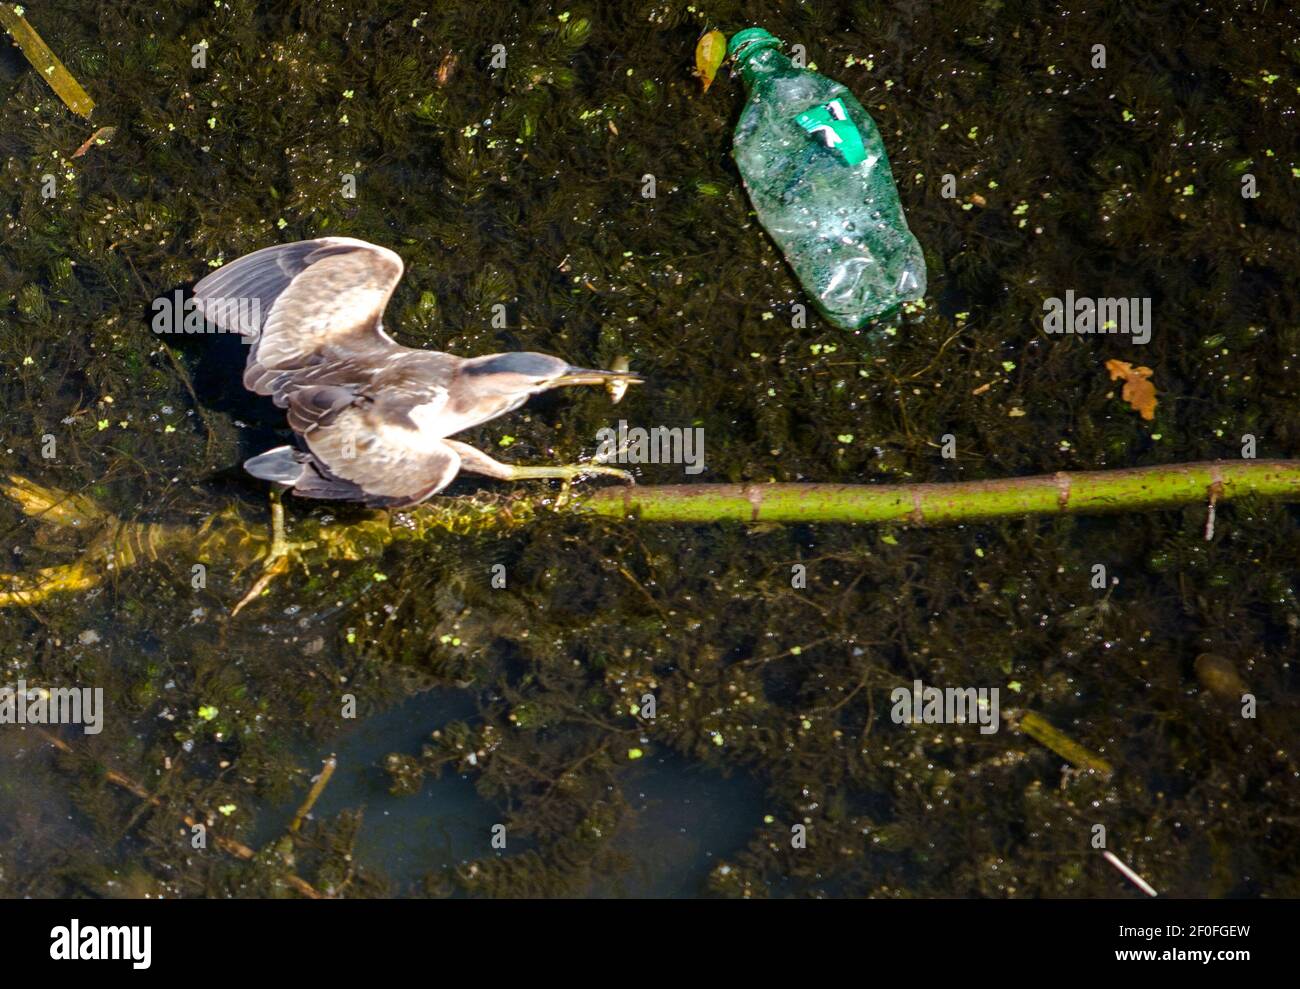 A water bird, fishing in a dirty river, with a plastic bottle vestige Stock Photo